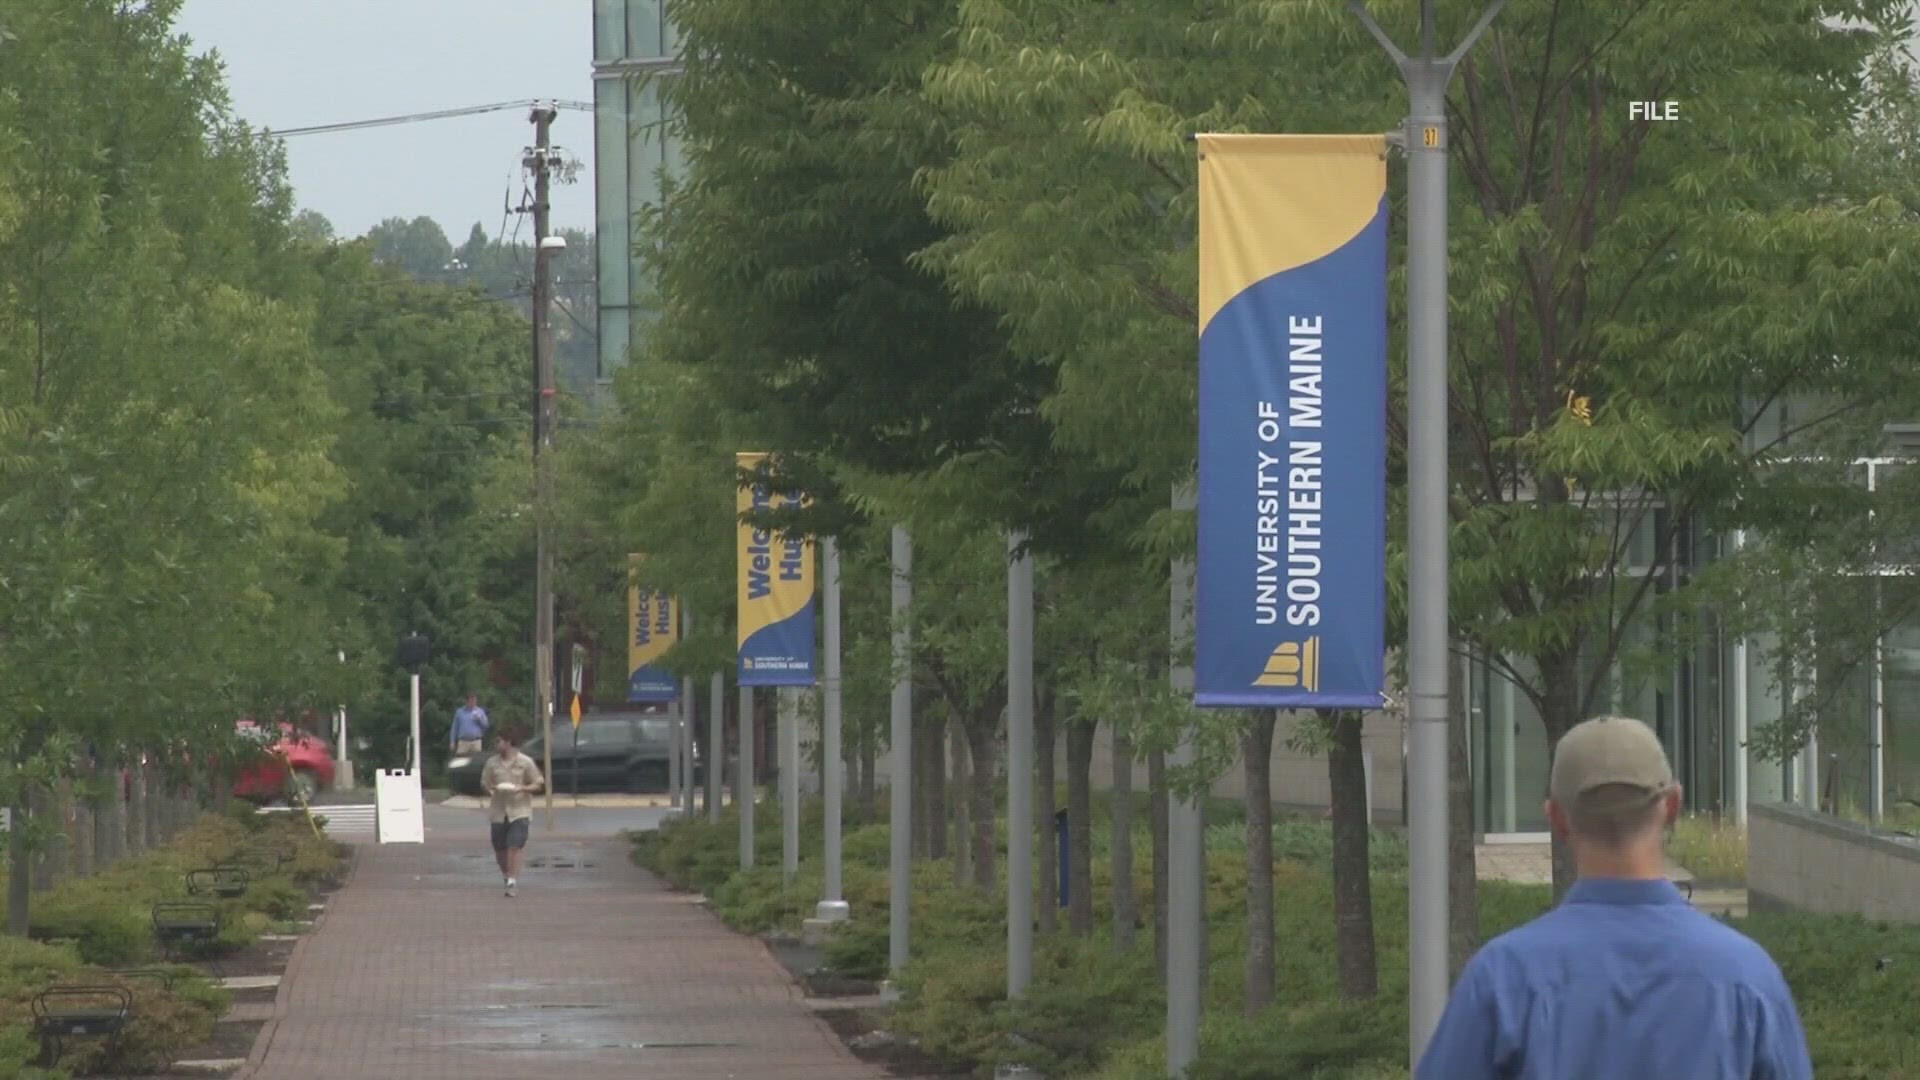 The University of Southern Maine is planning to offer a new bachelor's degree in special education. Applications are now being accepted for spring 2024.